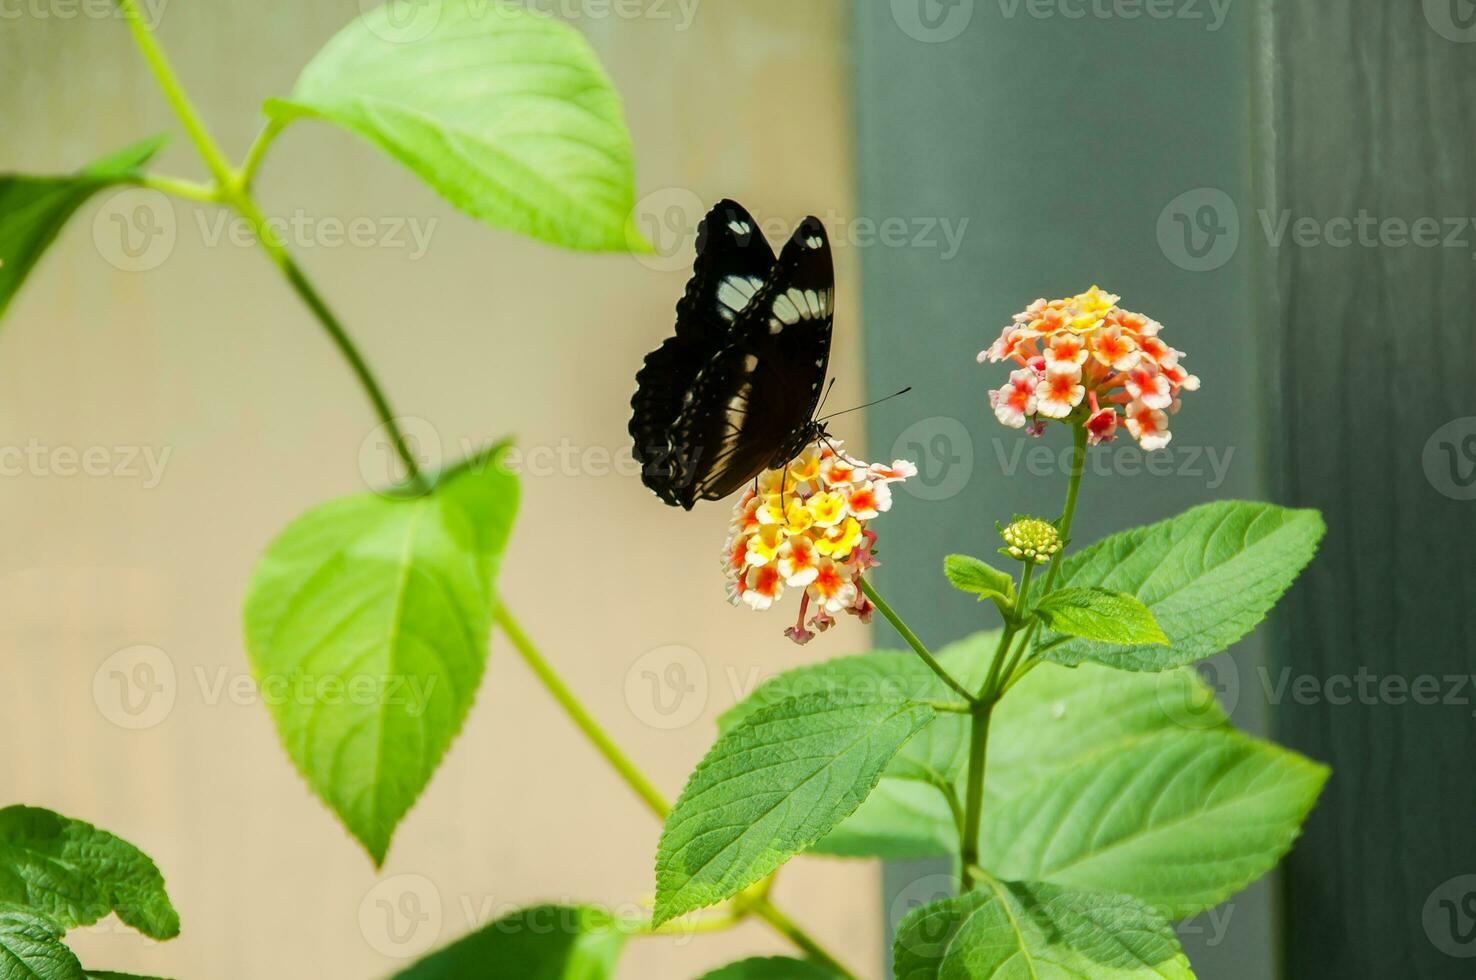 Beautiful and colorful image of a butterfly resting on a flower photo